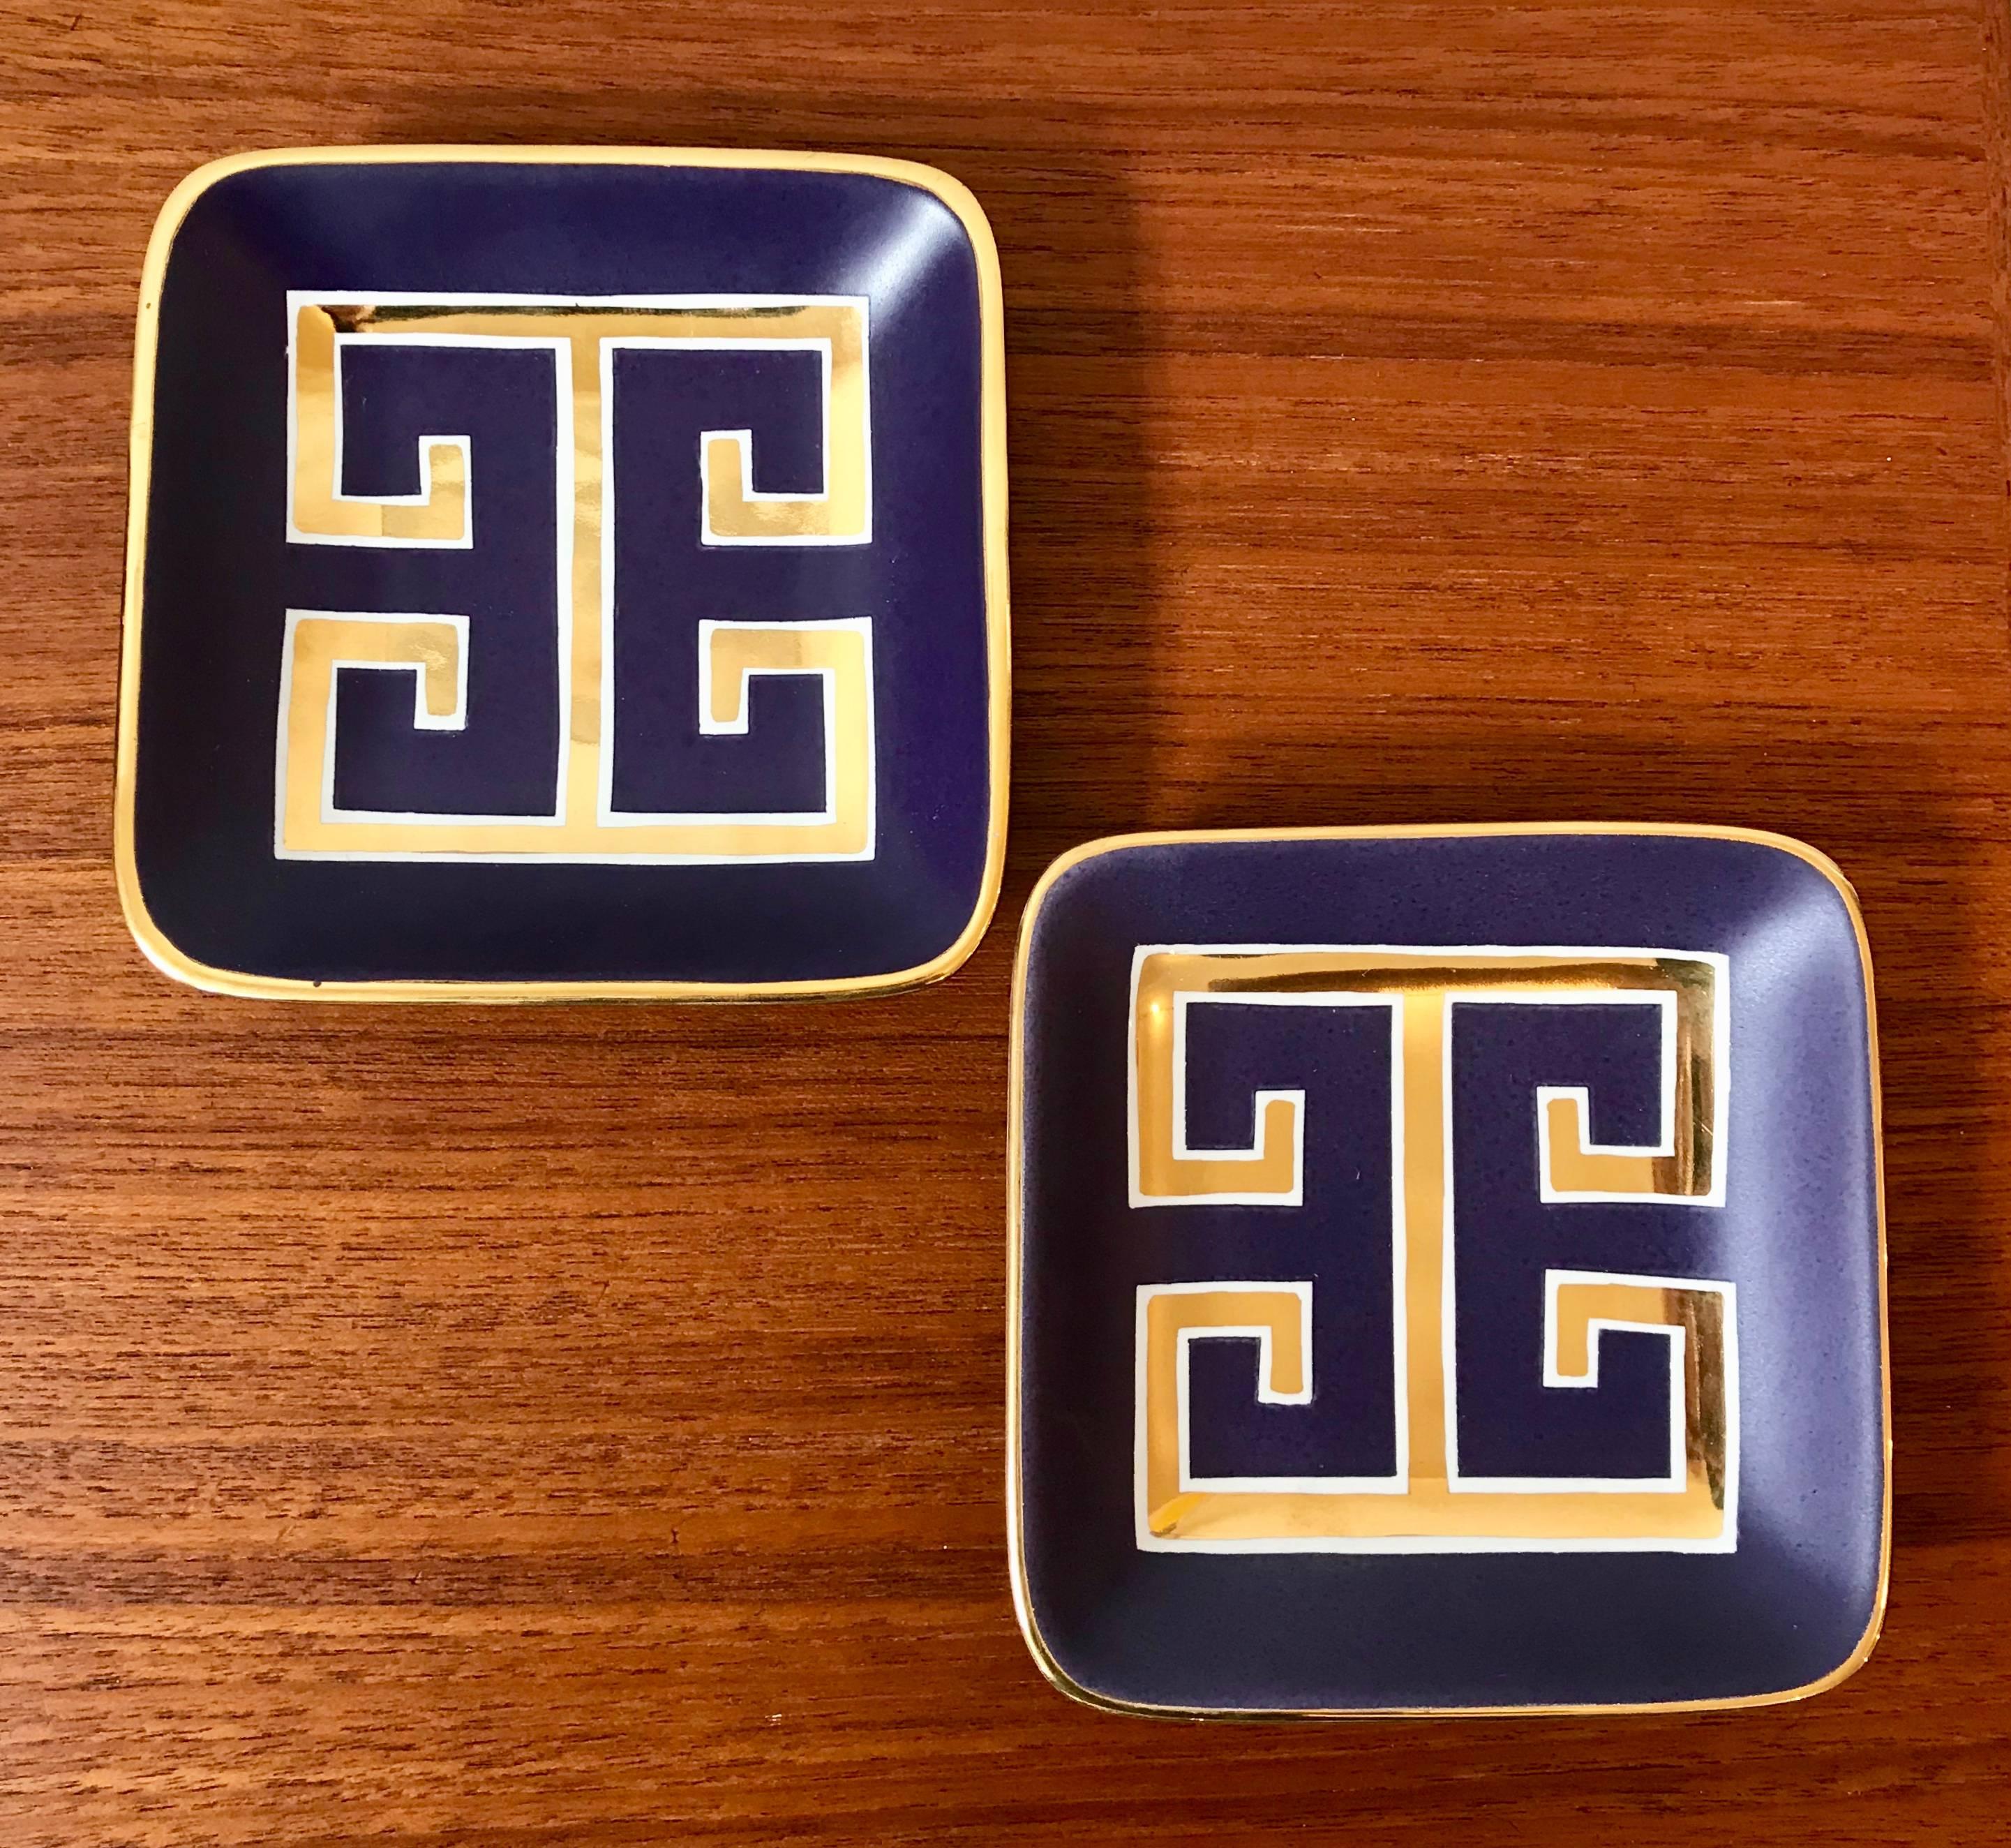 Pair of small trays or decorative square trinket dishes by Waylande Gregory. Vibrant matte purple glaze with 24-karat gold key pattern. Classic design by Gregory but newer production.